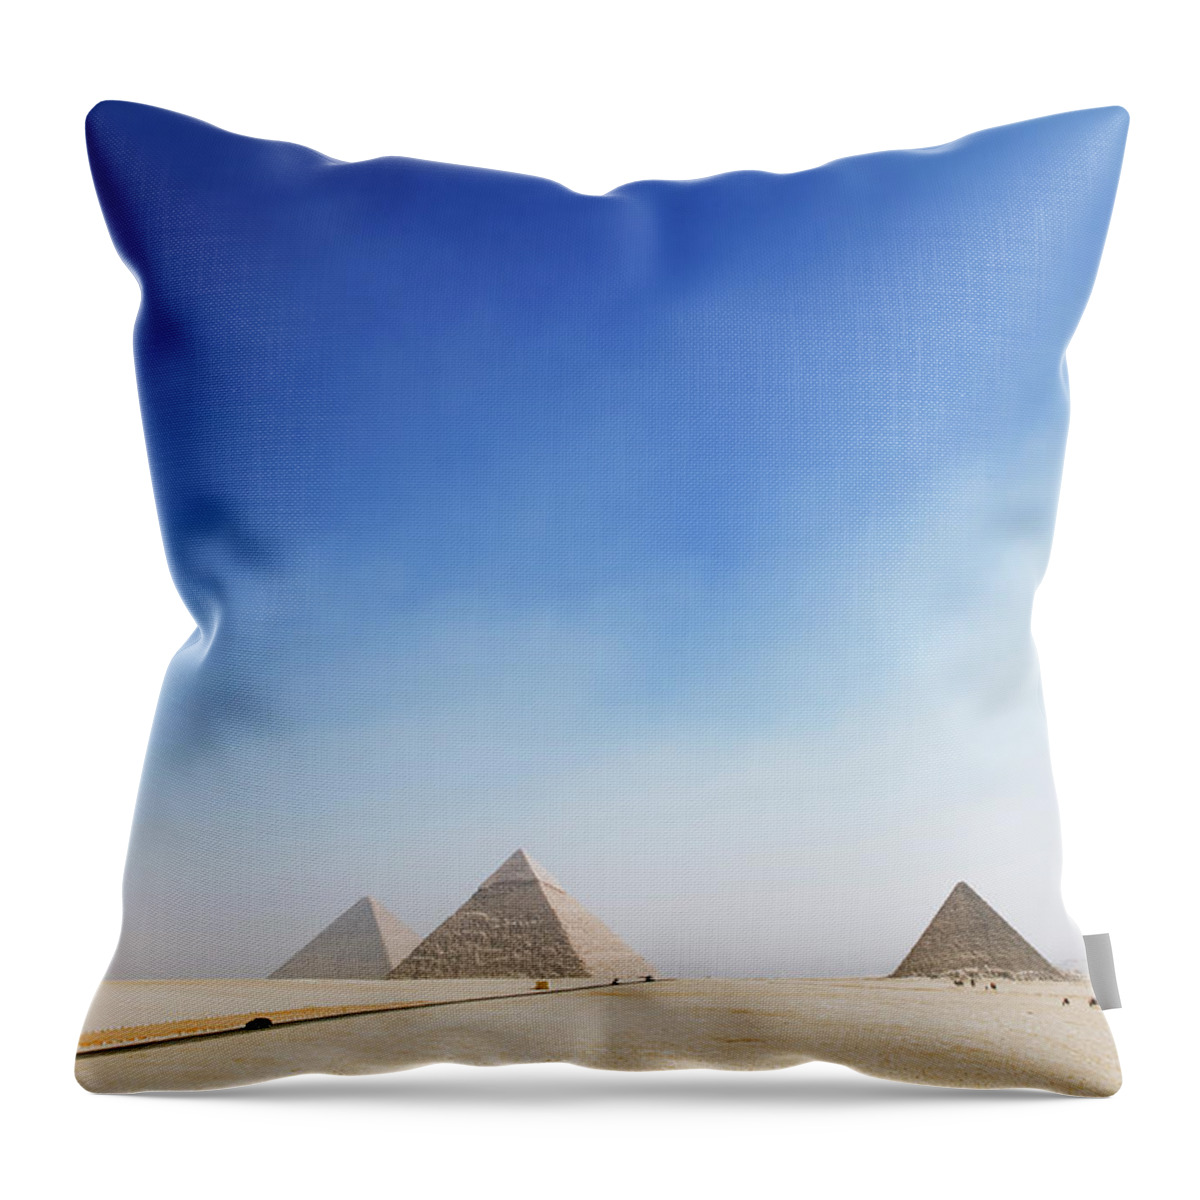 Clear Sky Throw Pillow featuring the photograph Giza Pyramids by Roine Magnusson